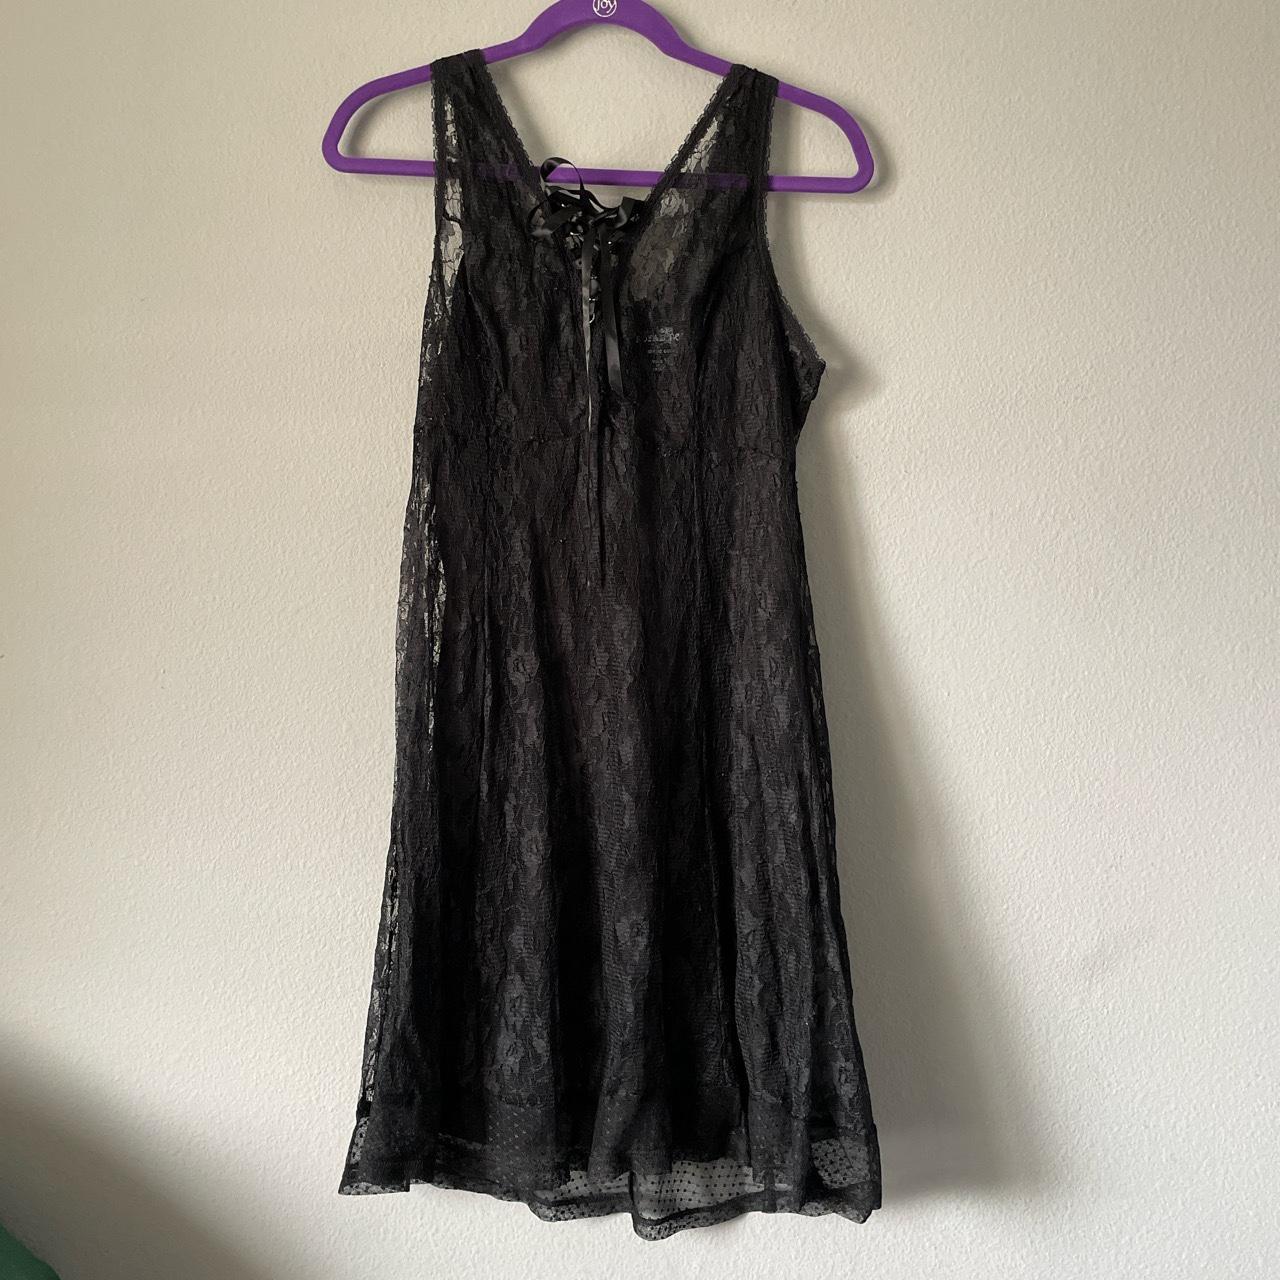 LARGE ROYAL BONES TRIPP LACEY DRESS WITH BUILT IN... - Depop